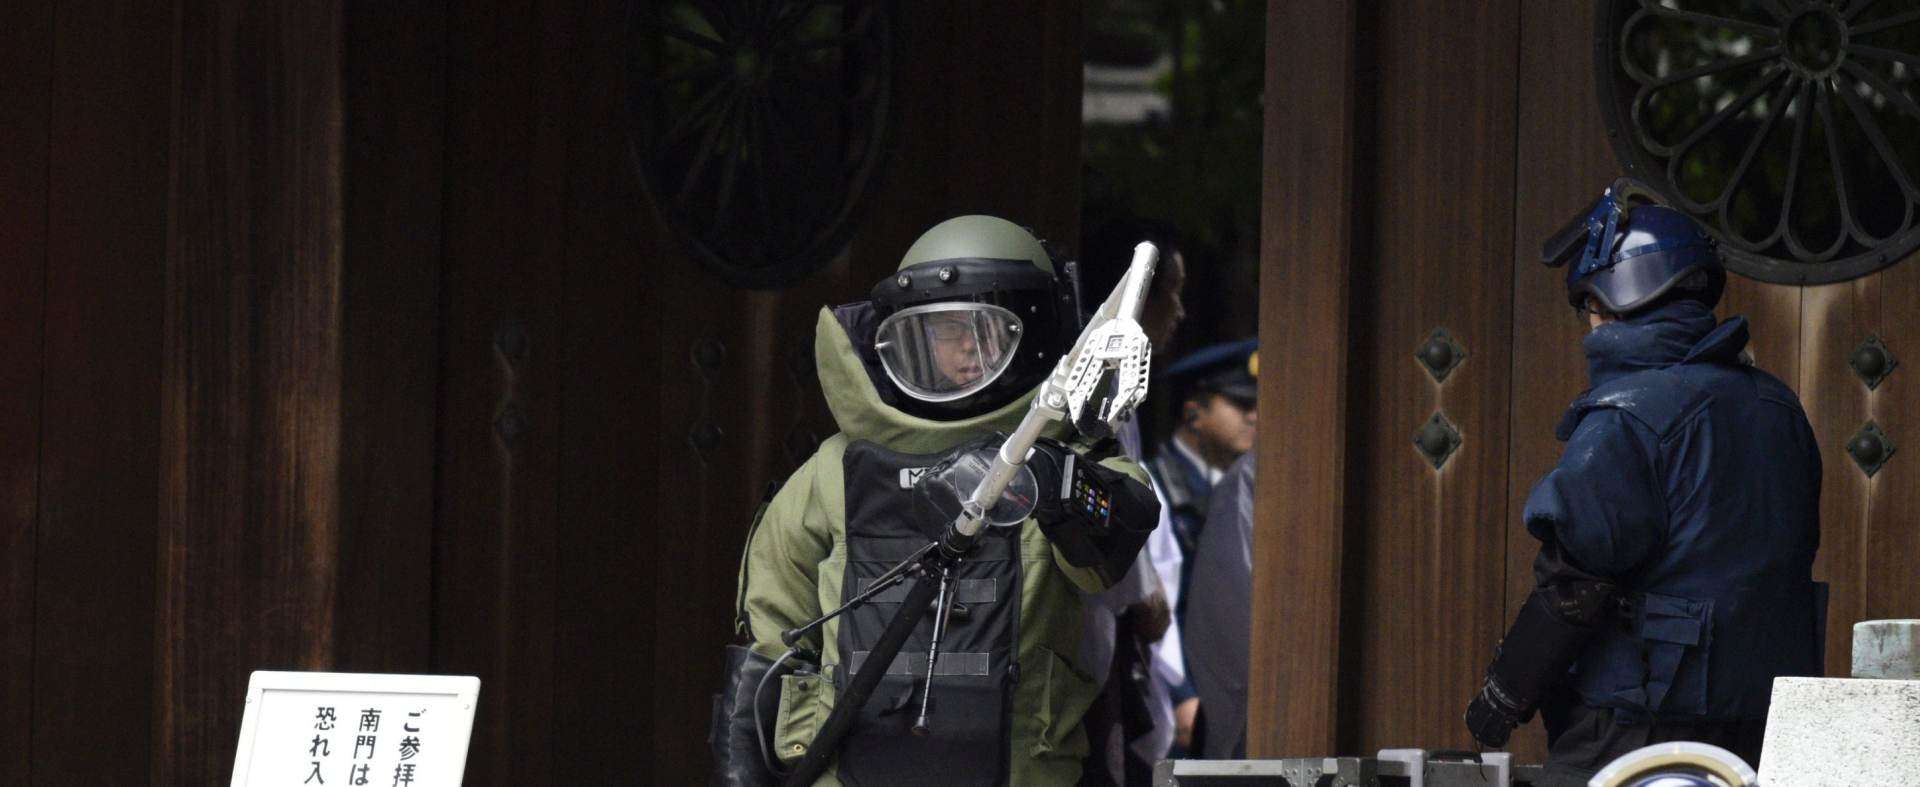 epa05038093 A bomb squad member wearing heavy equipment leaves the explosion site at the Yasukuni shrine precints in Tokyo, Japan, 23 November 2015. More than 100 police, firefighters and officials gathered at the site after an explosion was heard in the toilets of the Yasukuni Shrine, a controversial war shrine in the capital Tokyo. Local media reports said police found possible traces of an explosion, as well as batteries and wires at the shrine. There were no reports of injuries.  EPA/FRANCK ROBICHON